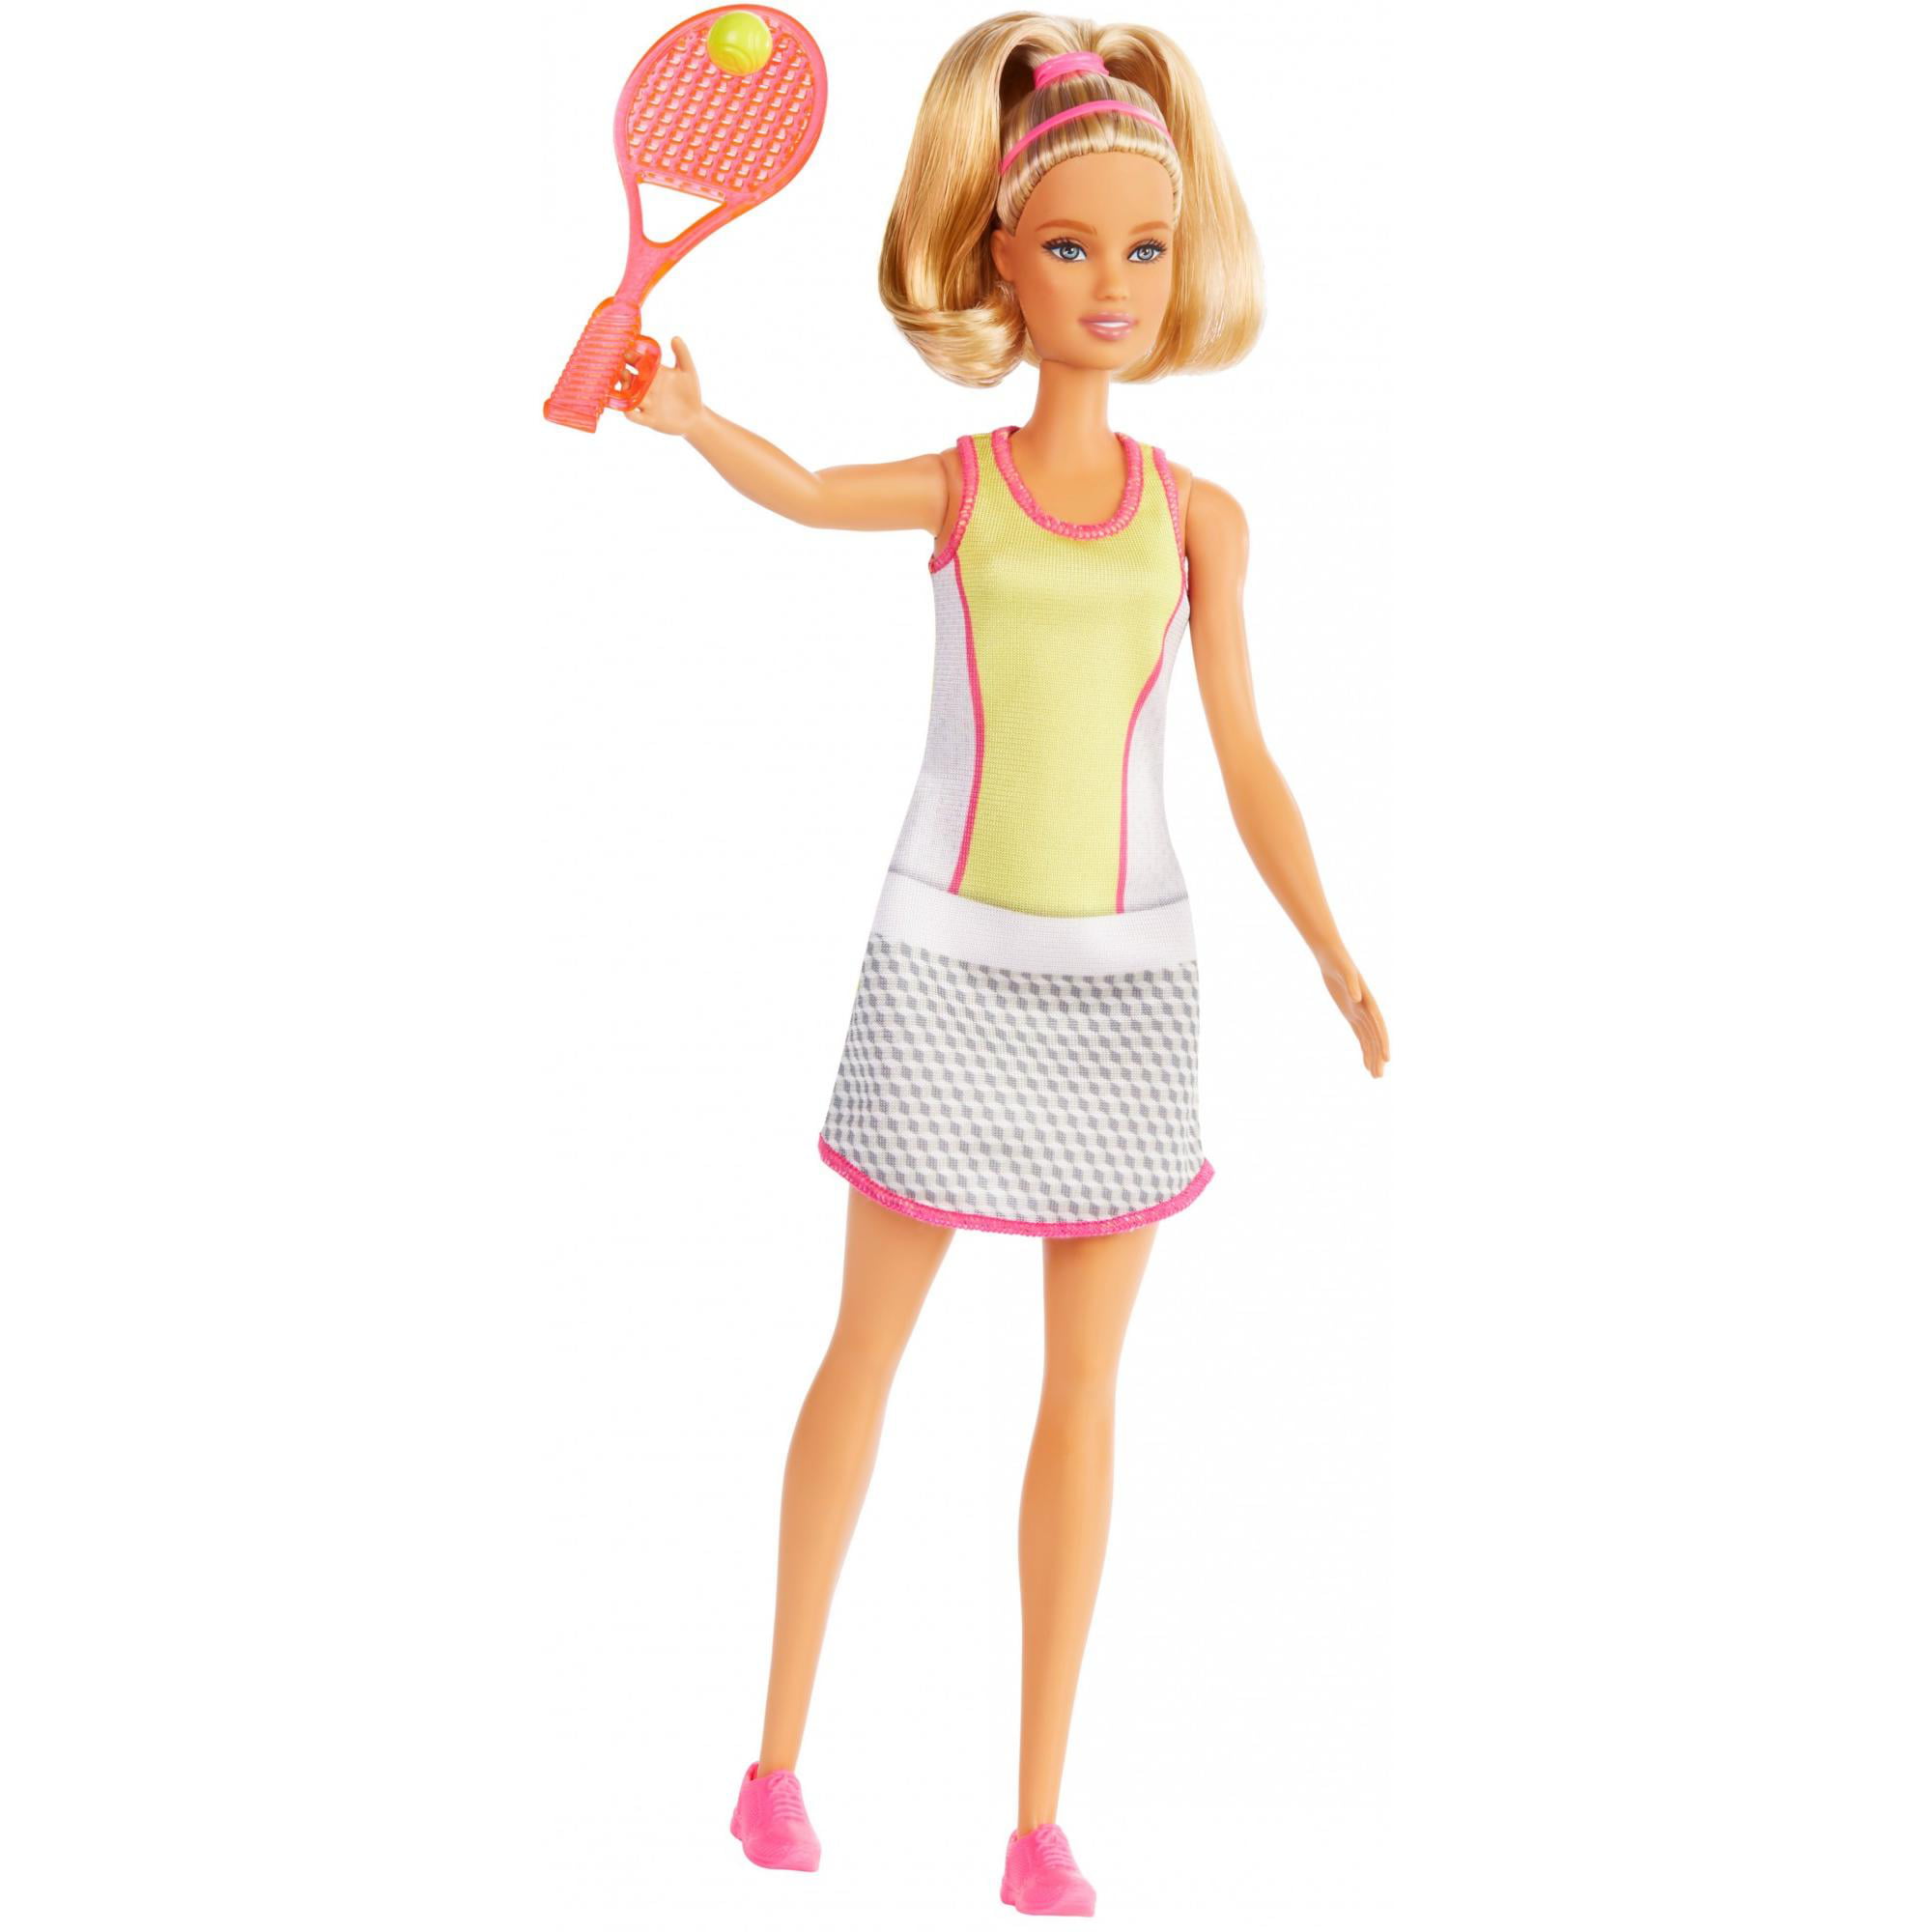 Barbie Doll 4 Career Fashions Tennis Player Teacher Musician Painter Outfits New 